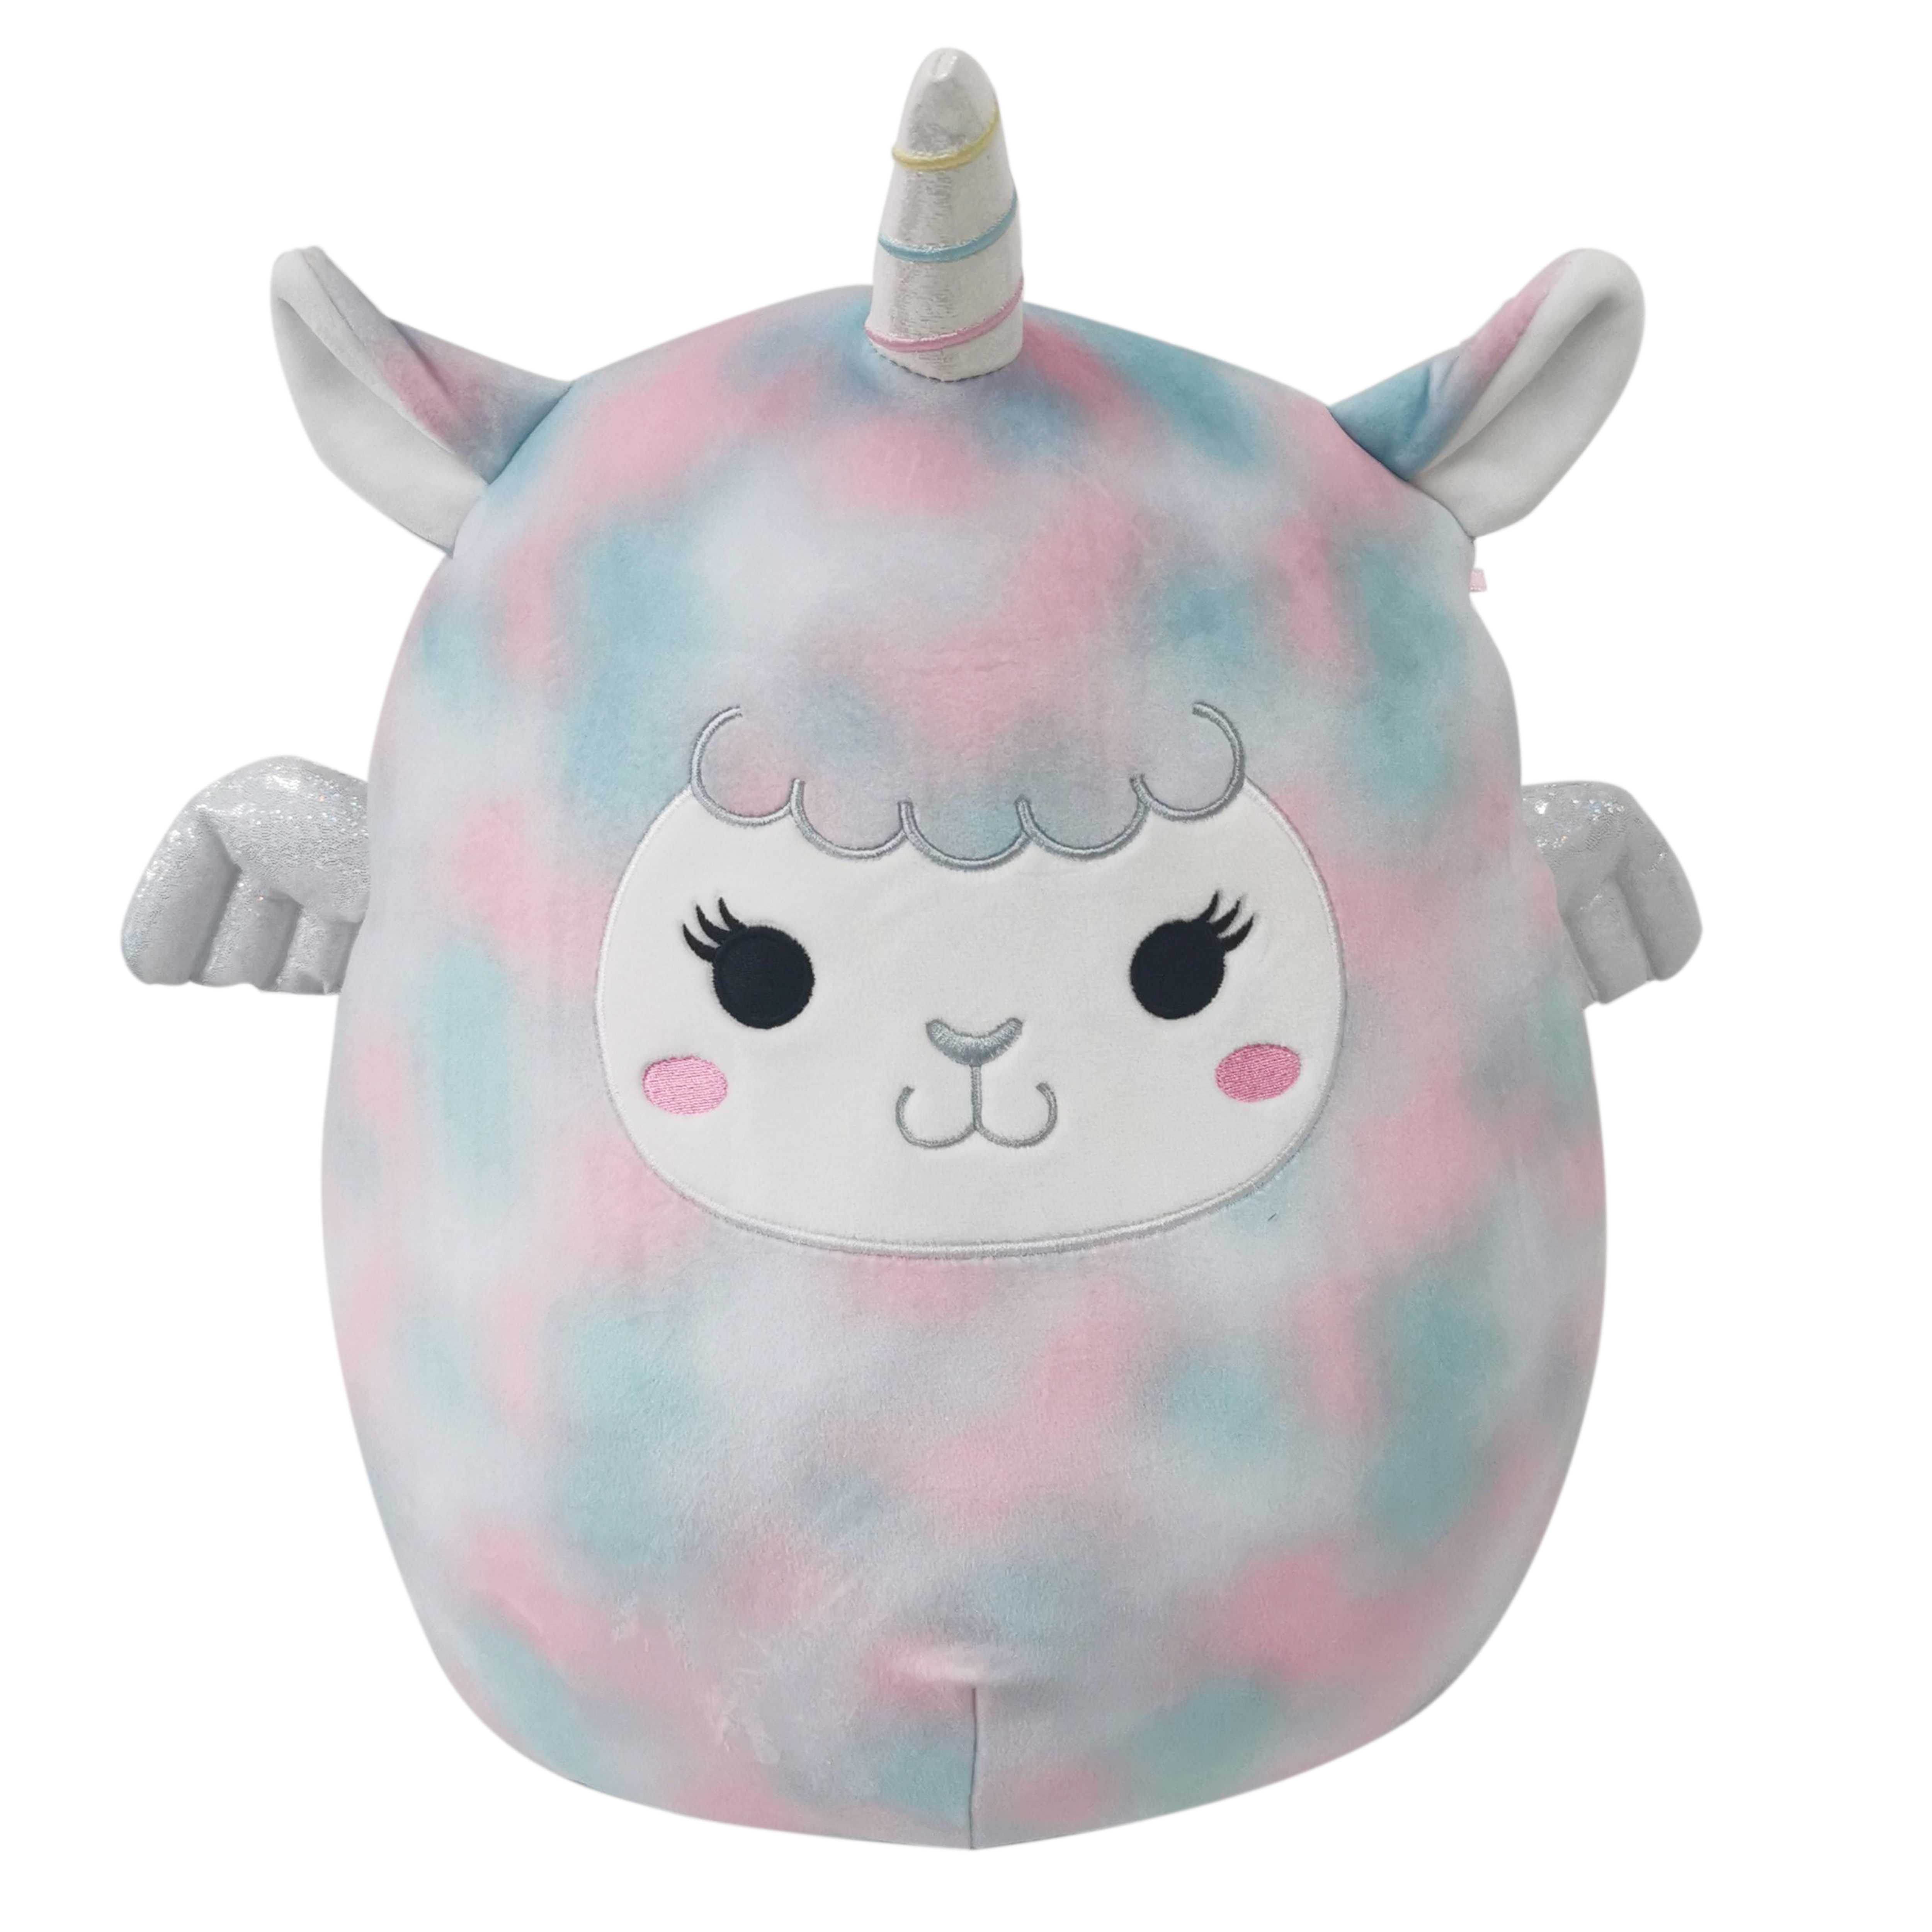 https://static.wikia.nocookie.net/squishmallowsquad/images/0/01/Winona.jpg/revision/latest?cb=20210807011407